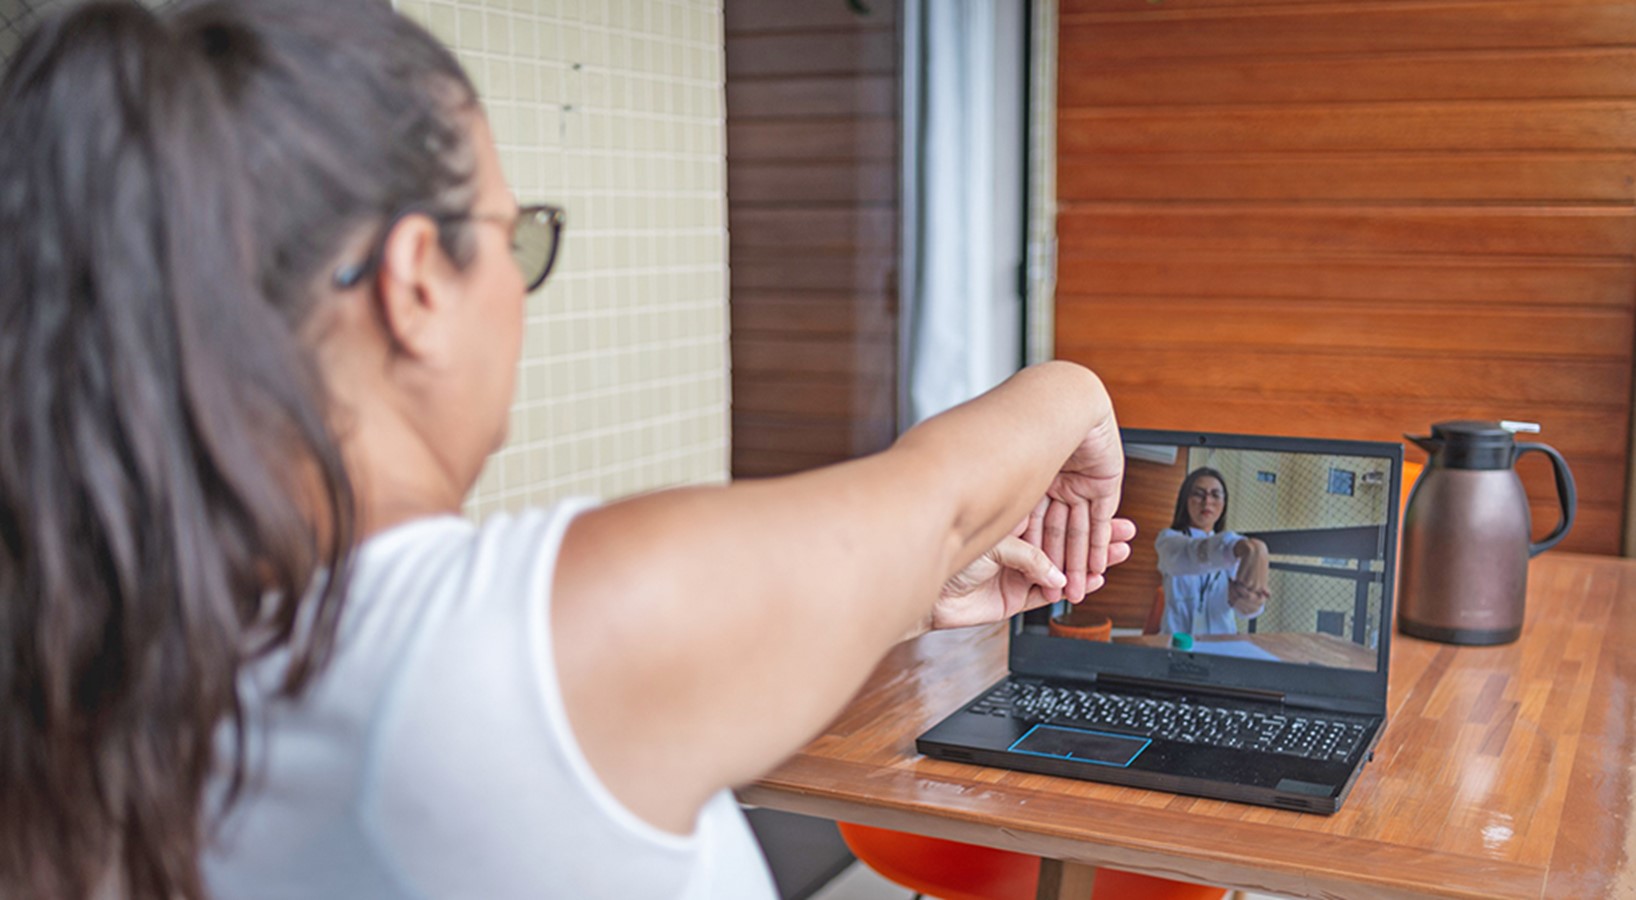 woman with brown hair stretches wrist in front of computer with provider on video